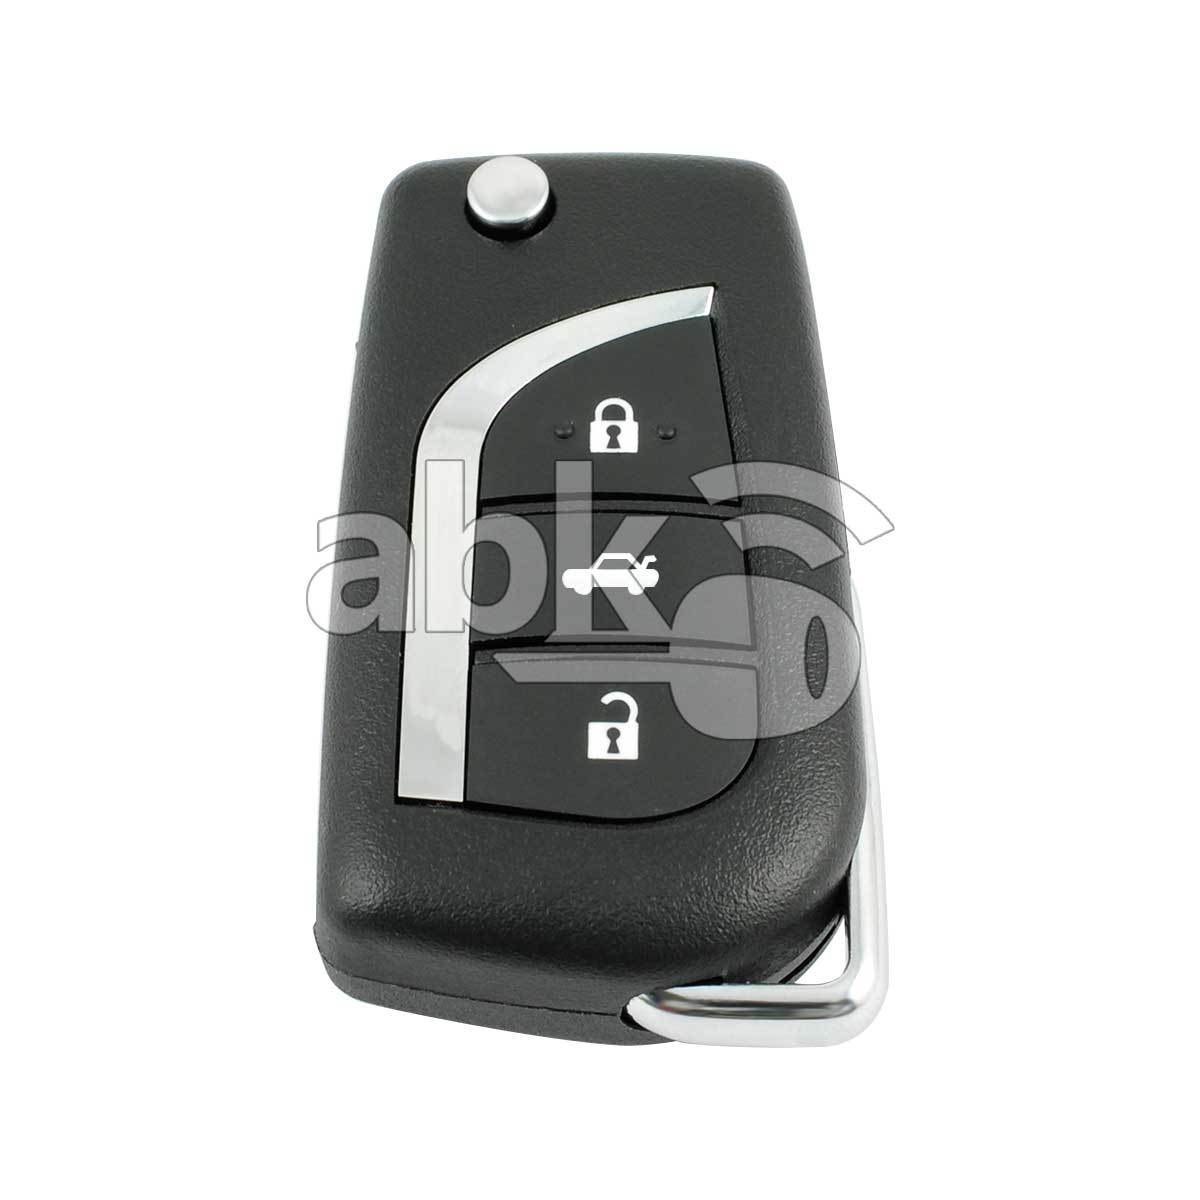 Replacement for 1998-2002 Toyota Land Cruiser Remote Car Key Fob Shell Case